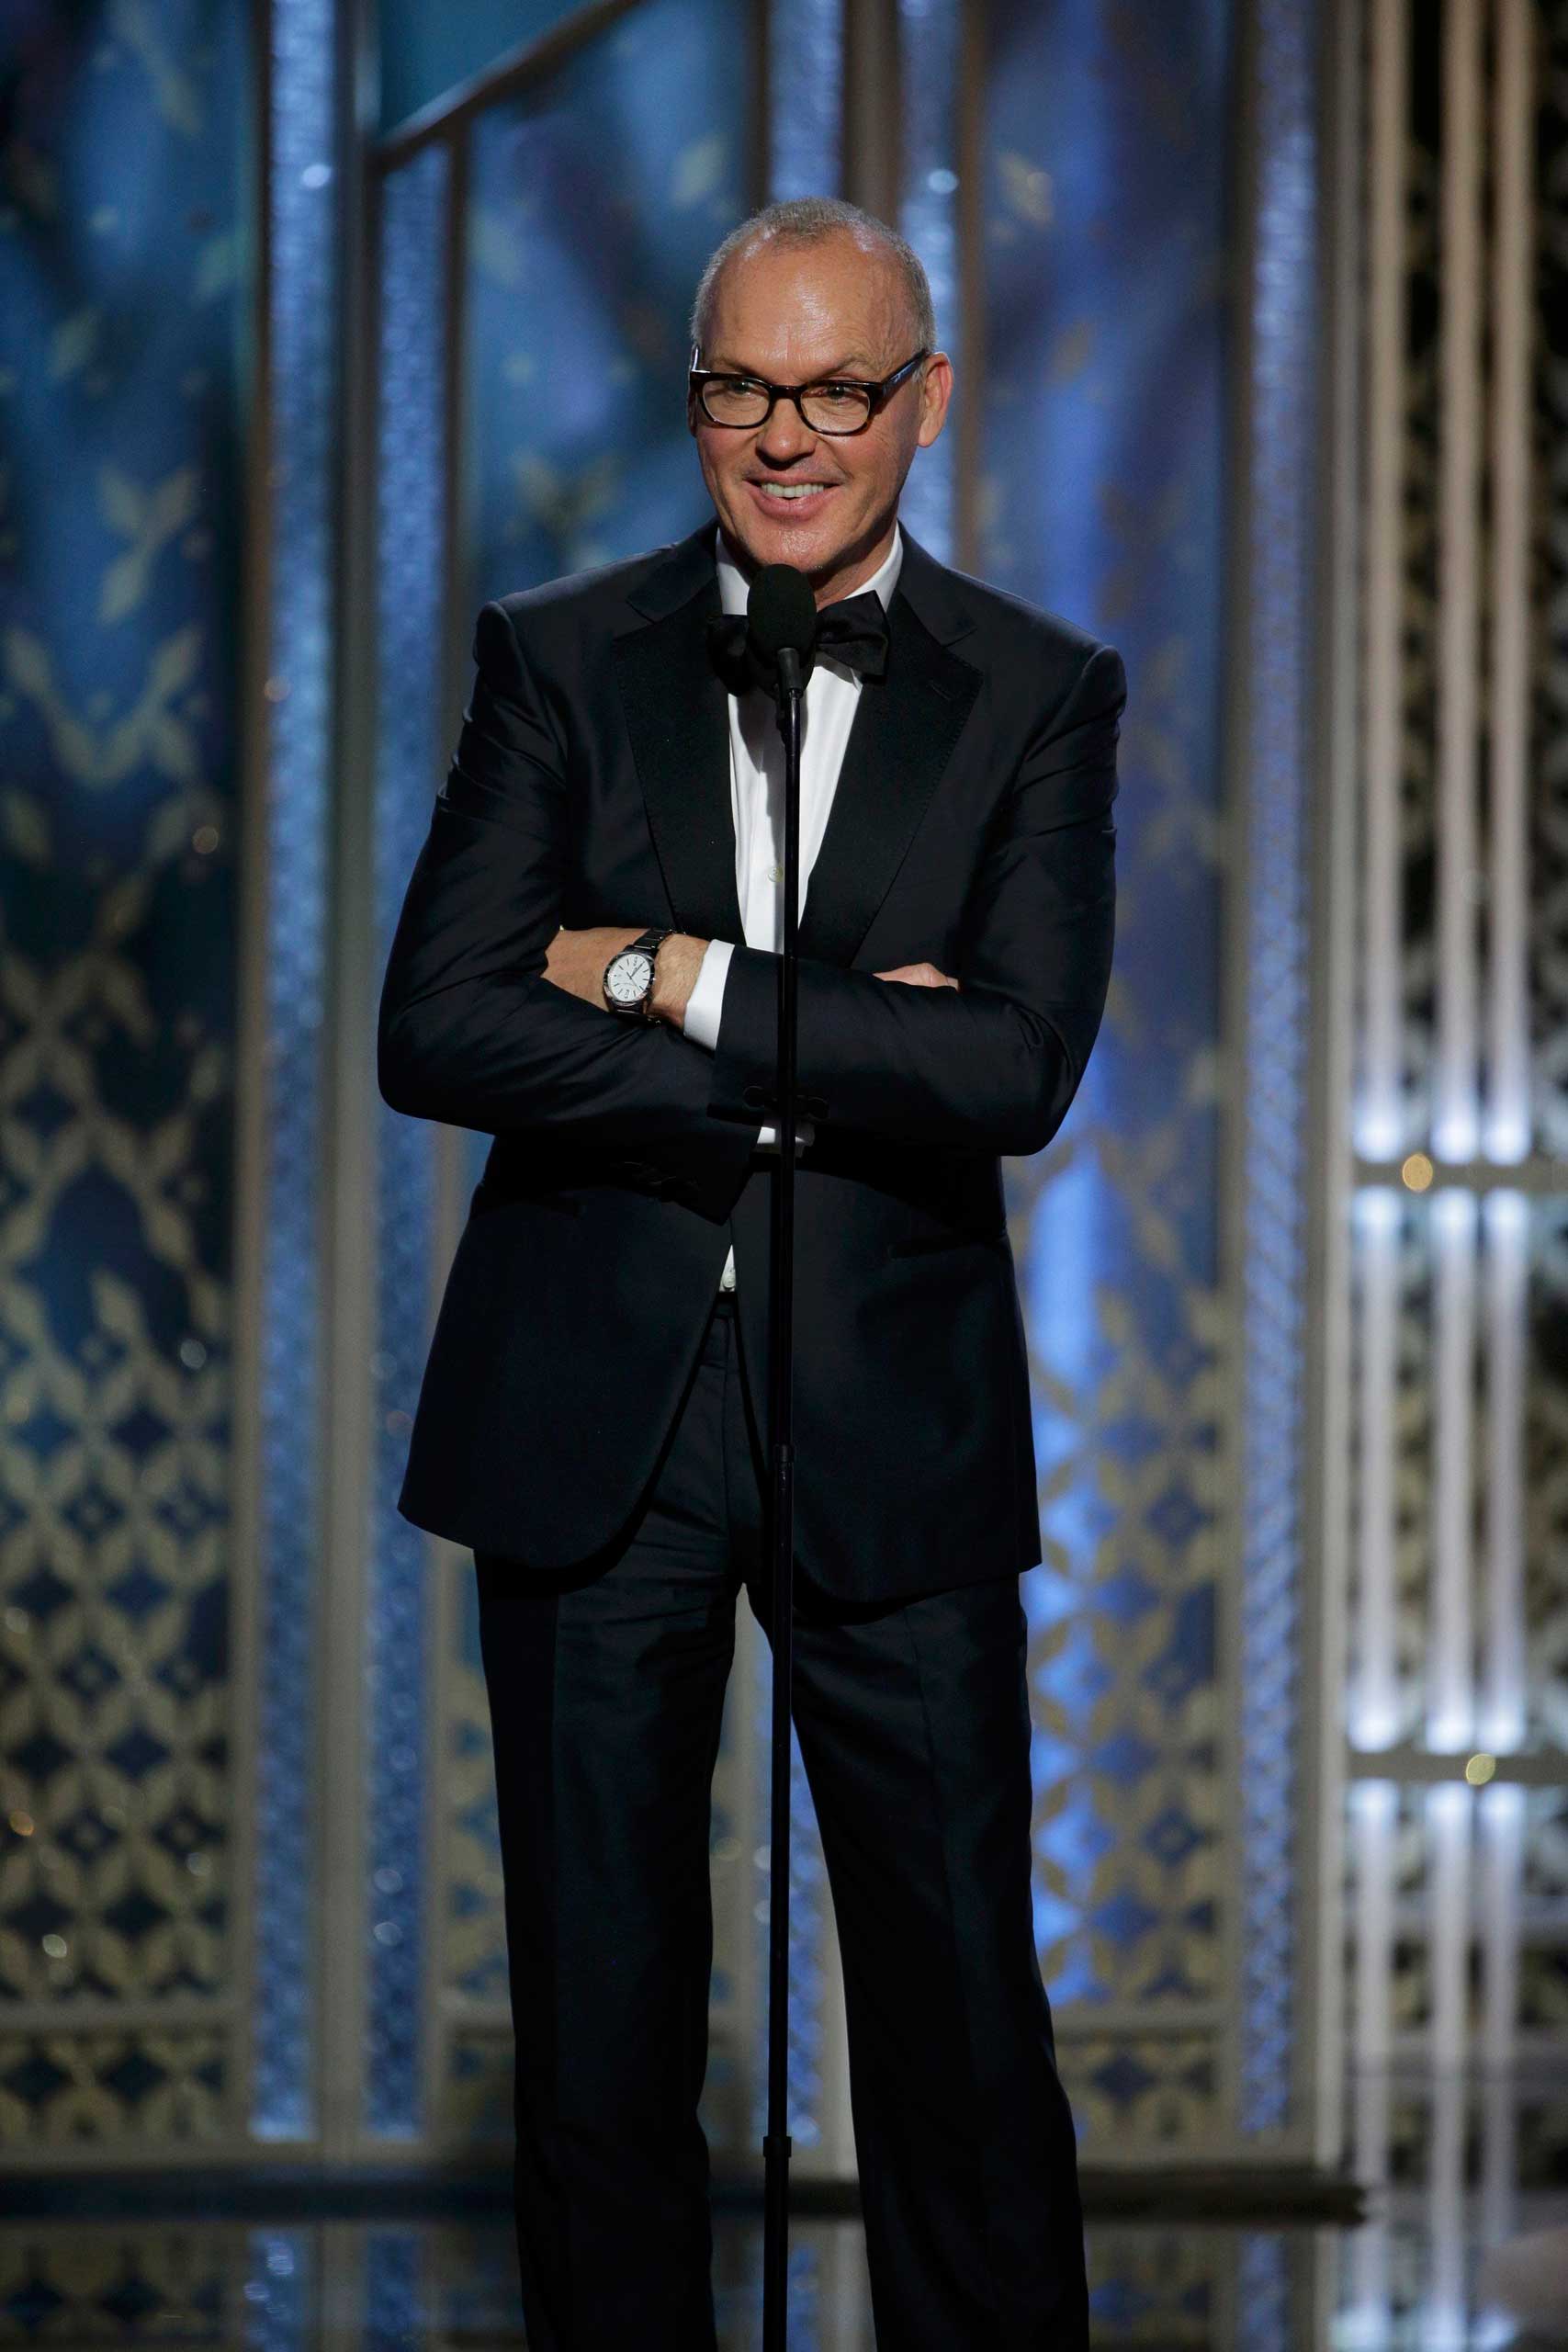 Michael Keaton accepts the Golden Globe Award for Best Actor - Motion Picture, Comedy or Musical for "Birdman" at the 72nd Golden Globe Awards in Beverly Hills, Jan. 11, 2015.